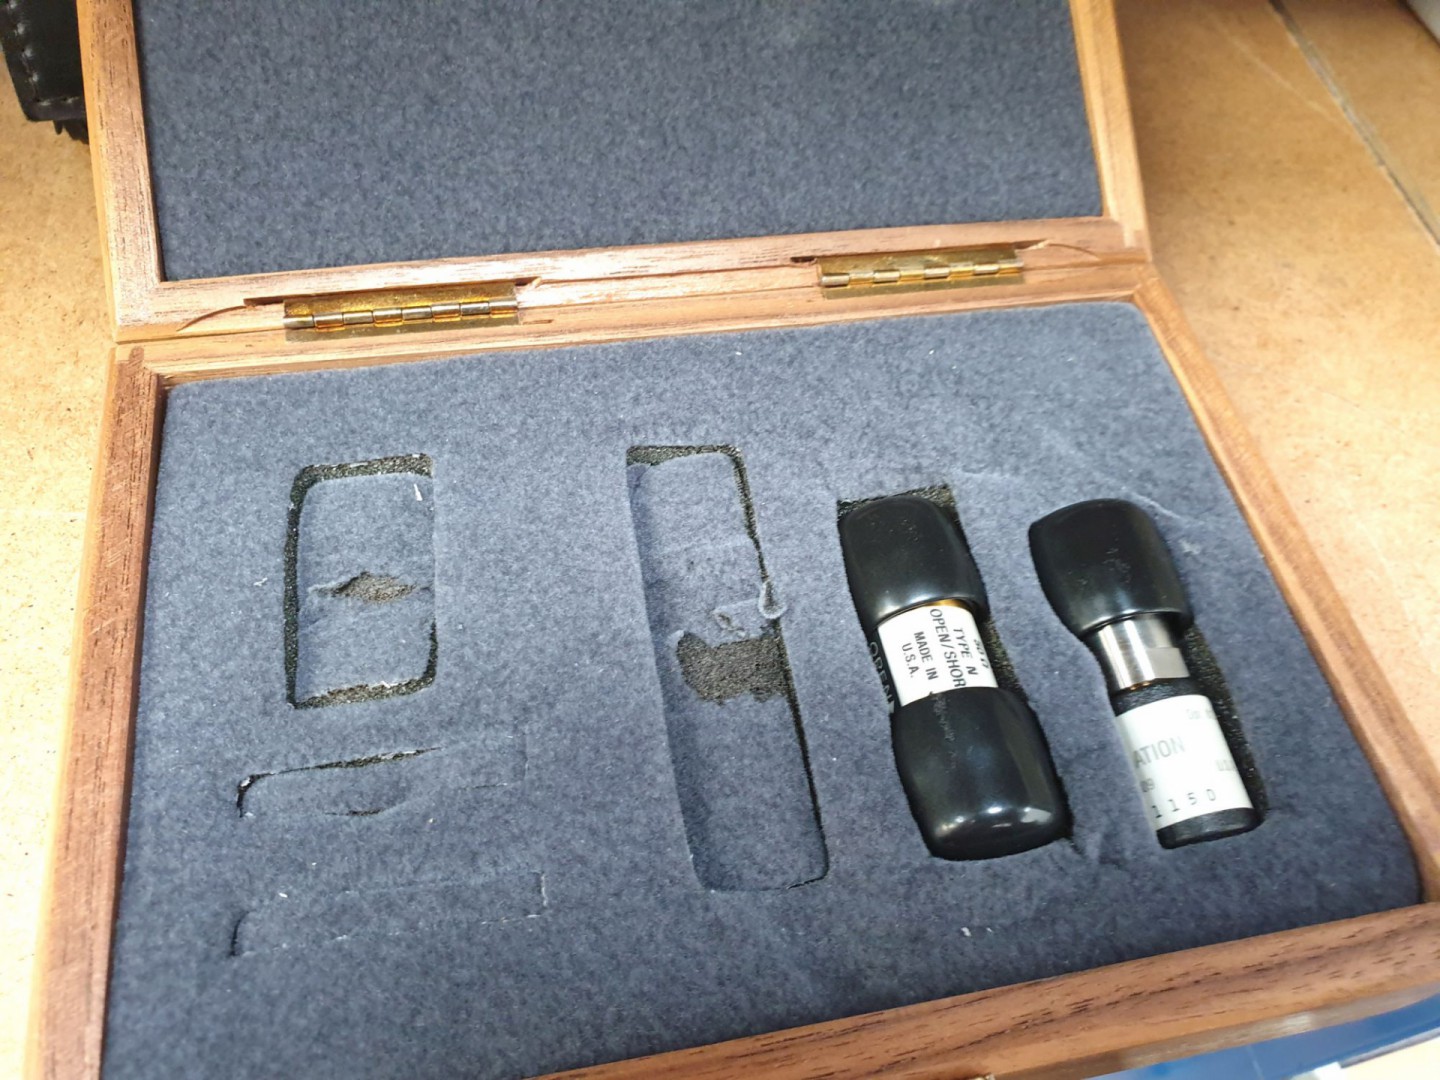 HP 85032E type N calibration kit in wooden case